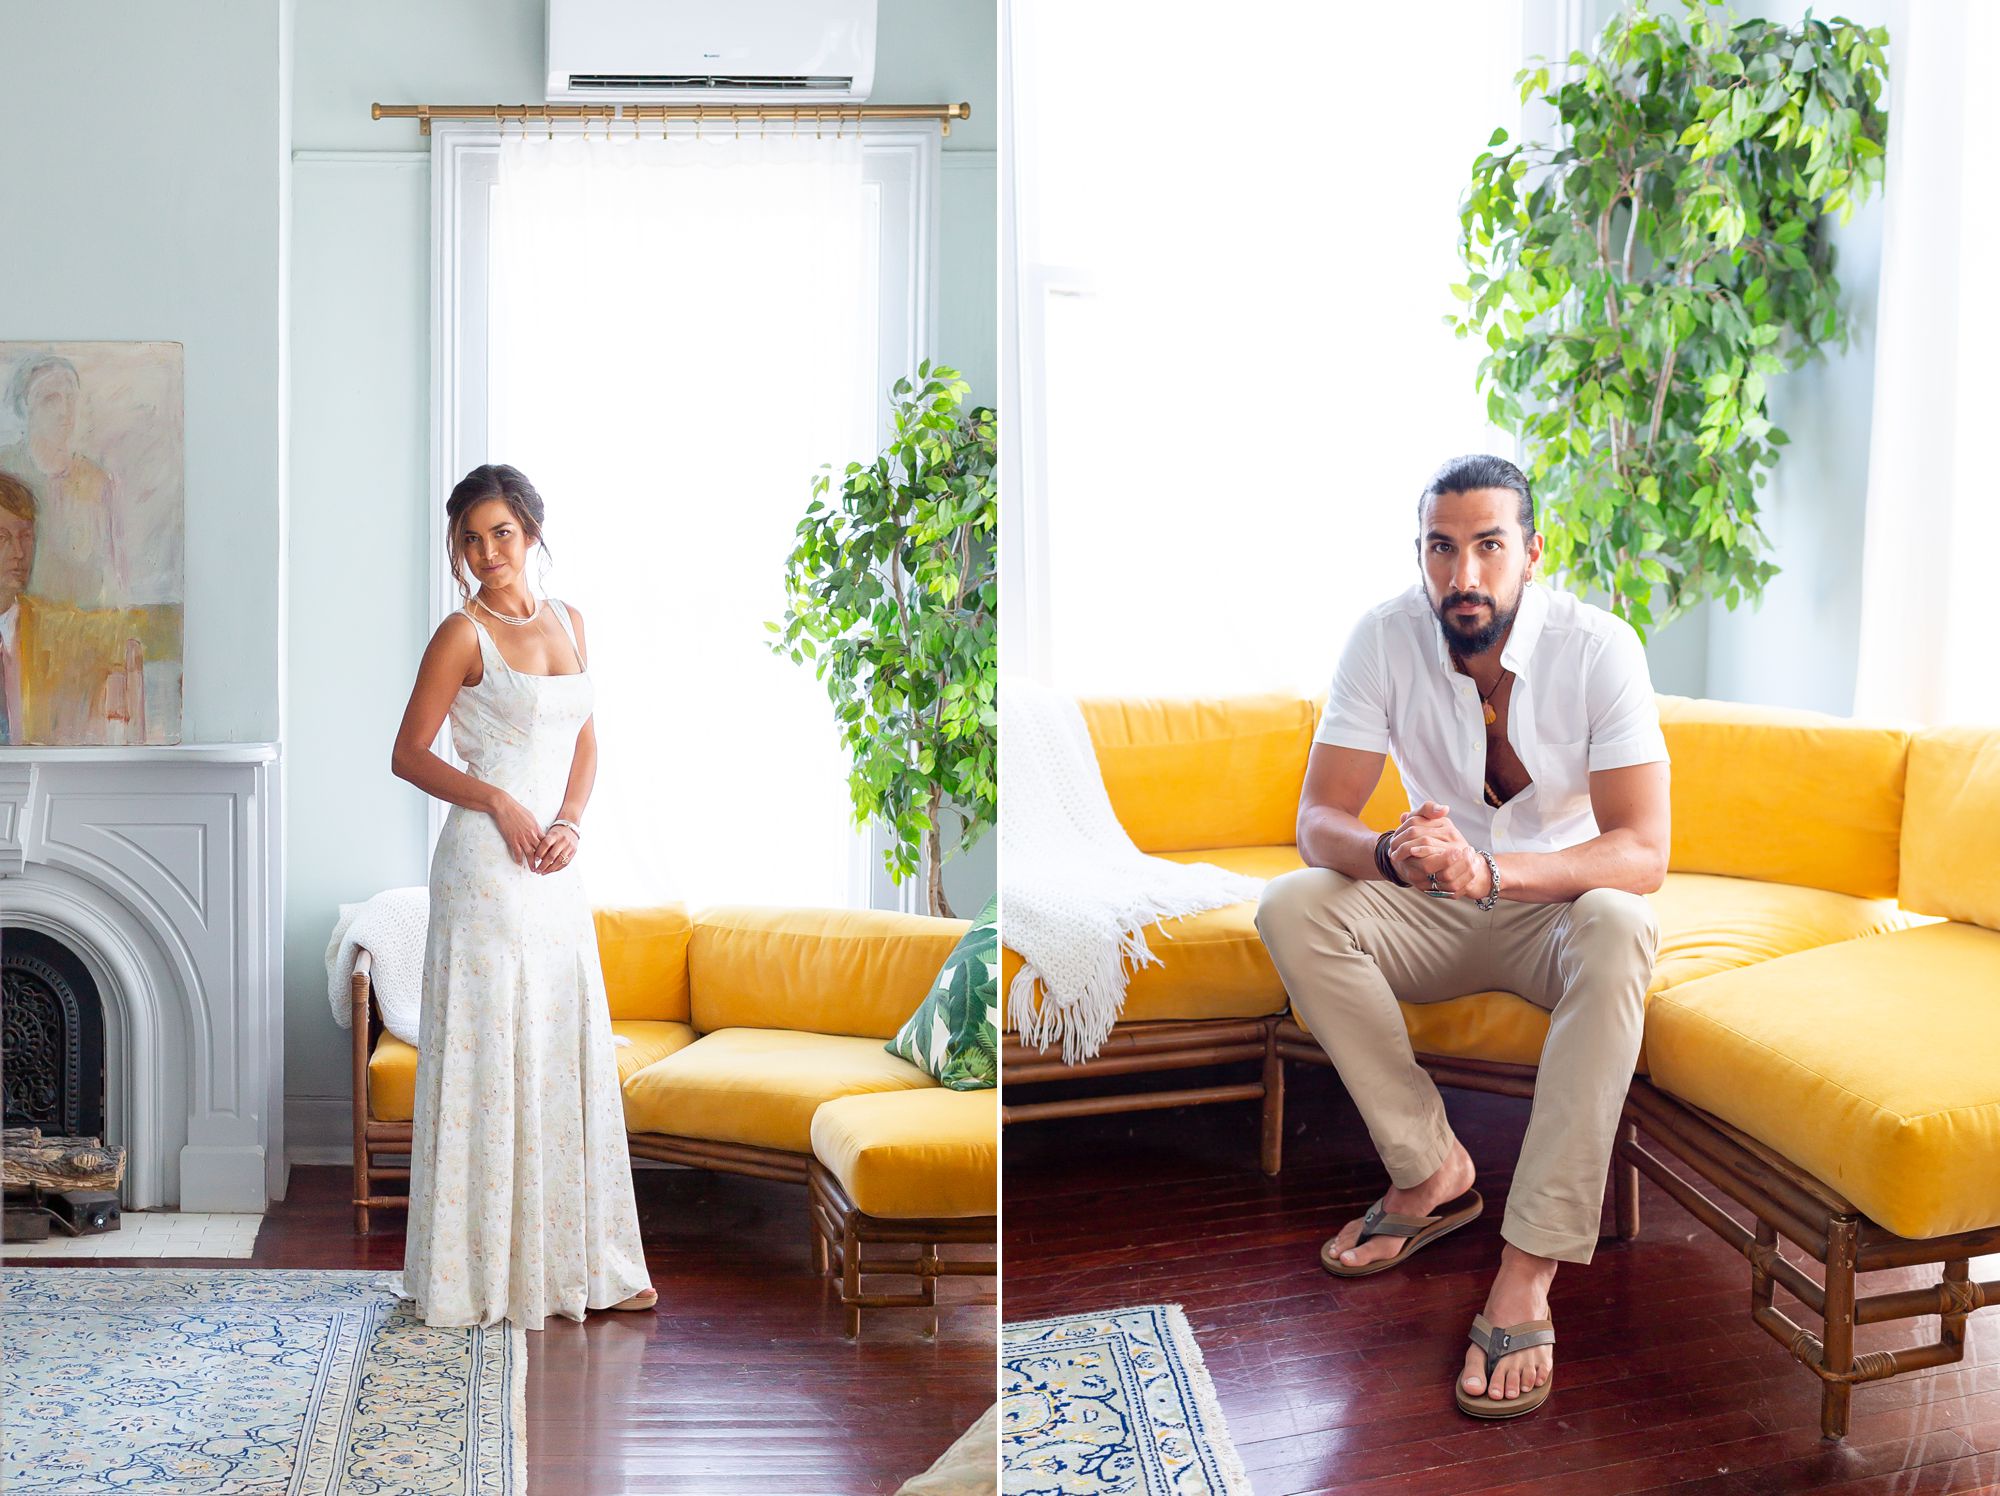 A bride stands in front of a window in her wedding gown; a groom sits on a yellow couch